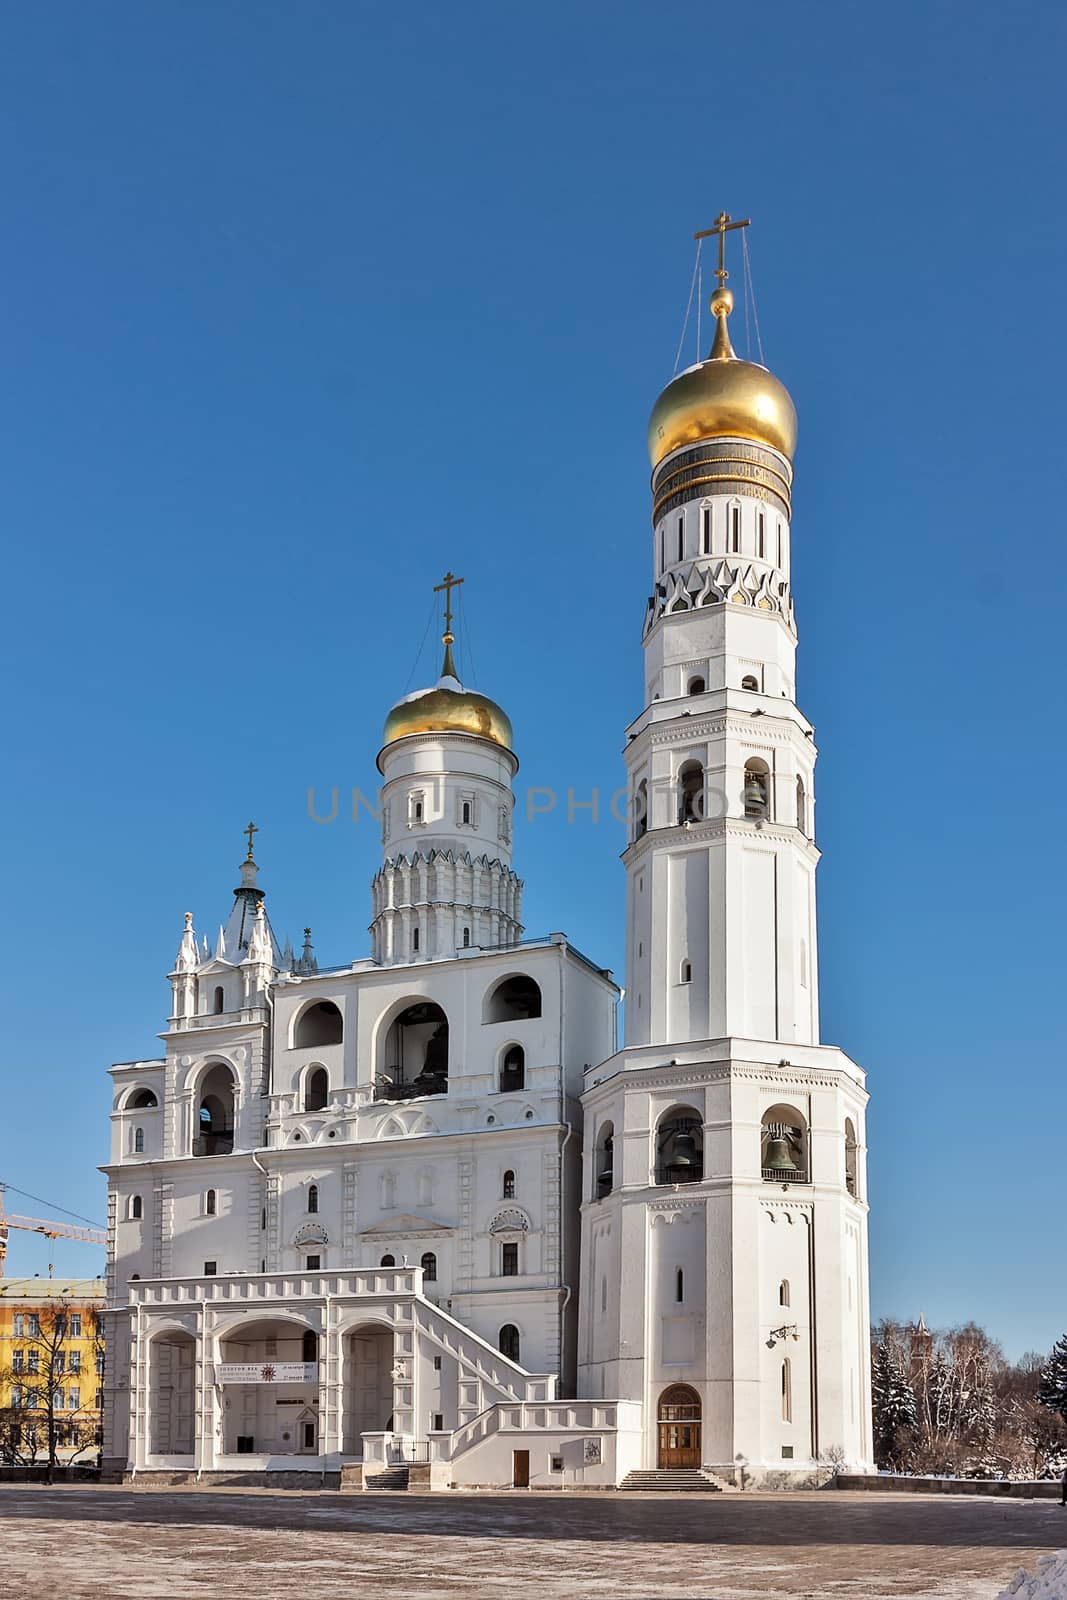 The Ivan the Great Bell Tower is the tallest of the towers in the Moscow Kremlin complex, with a total height of 81 metres (266 ft).